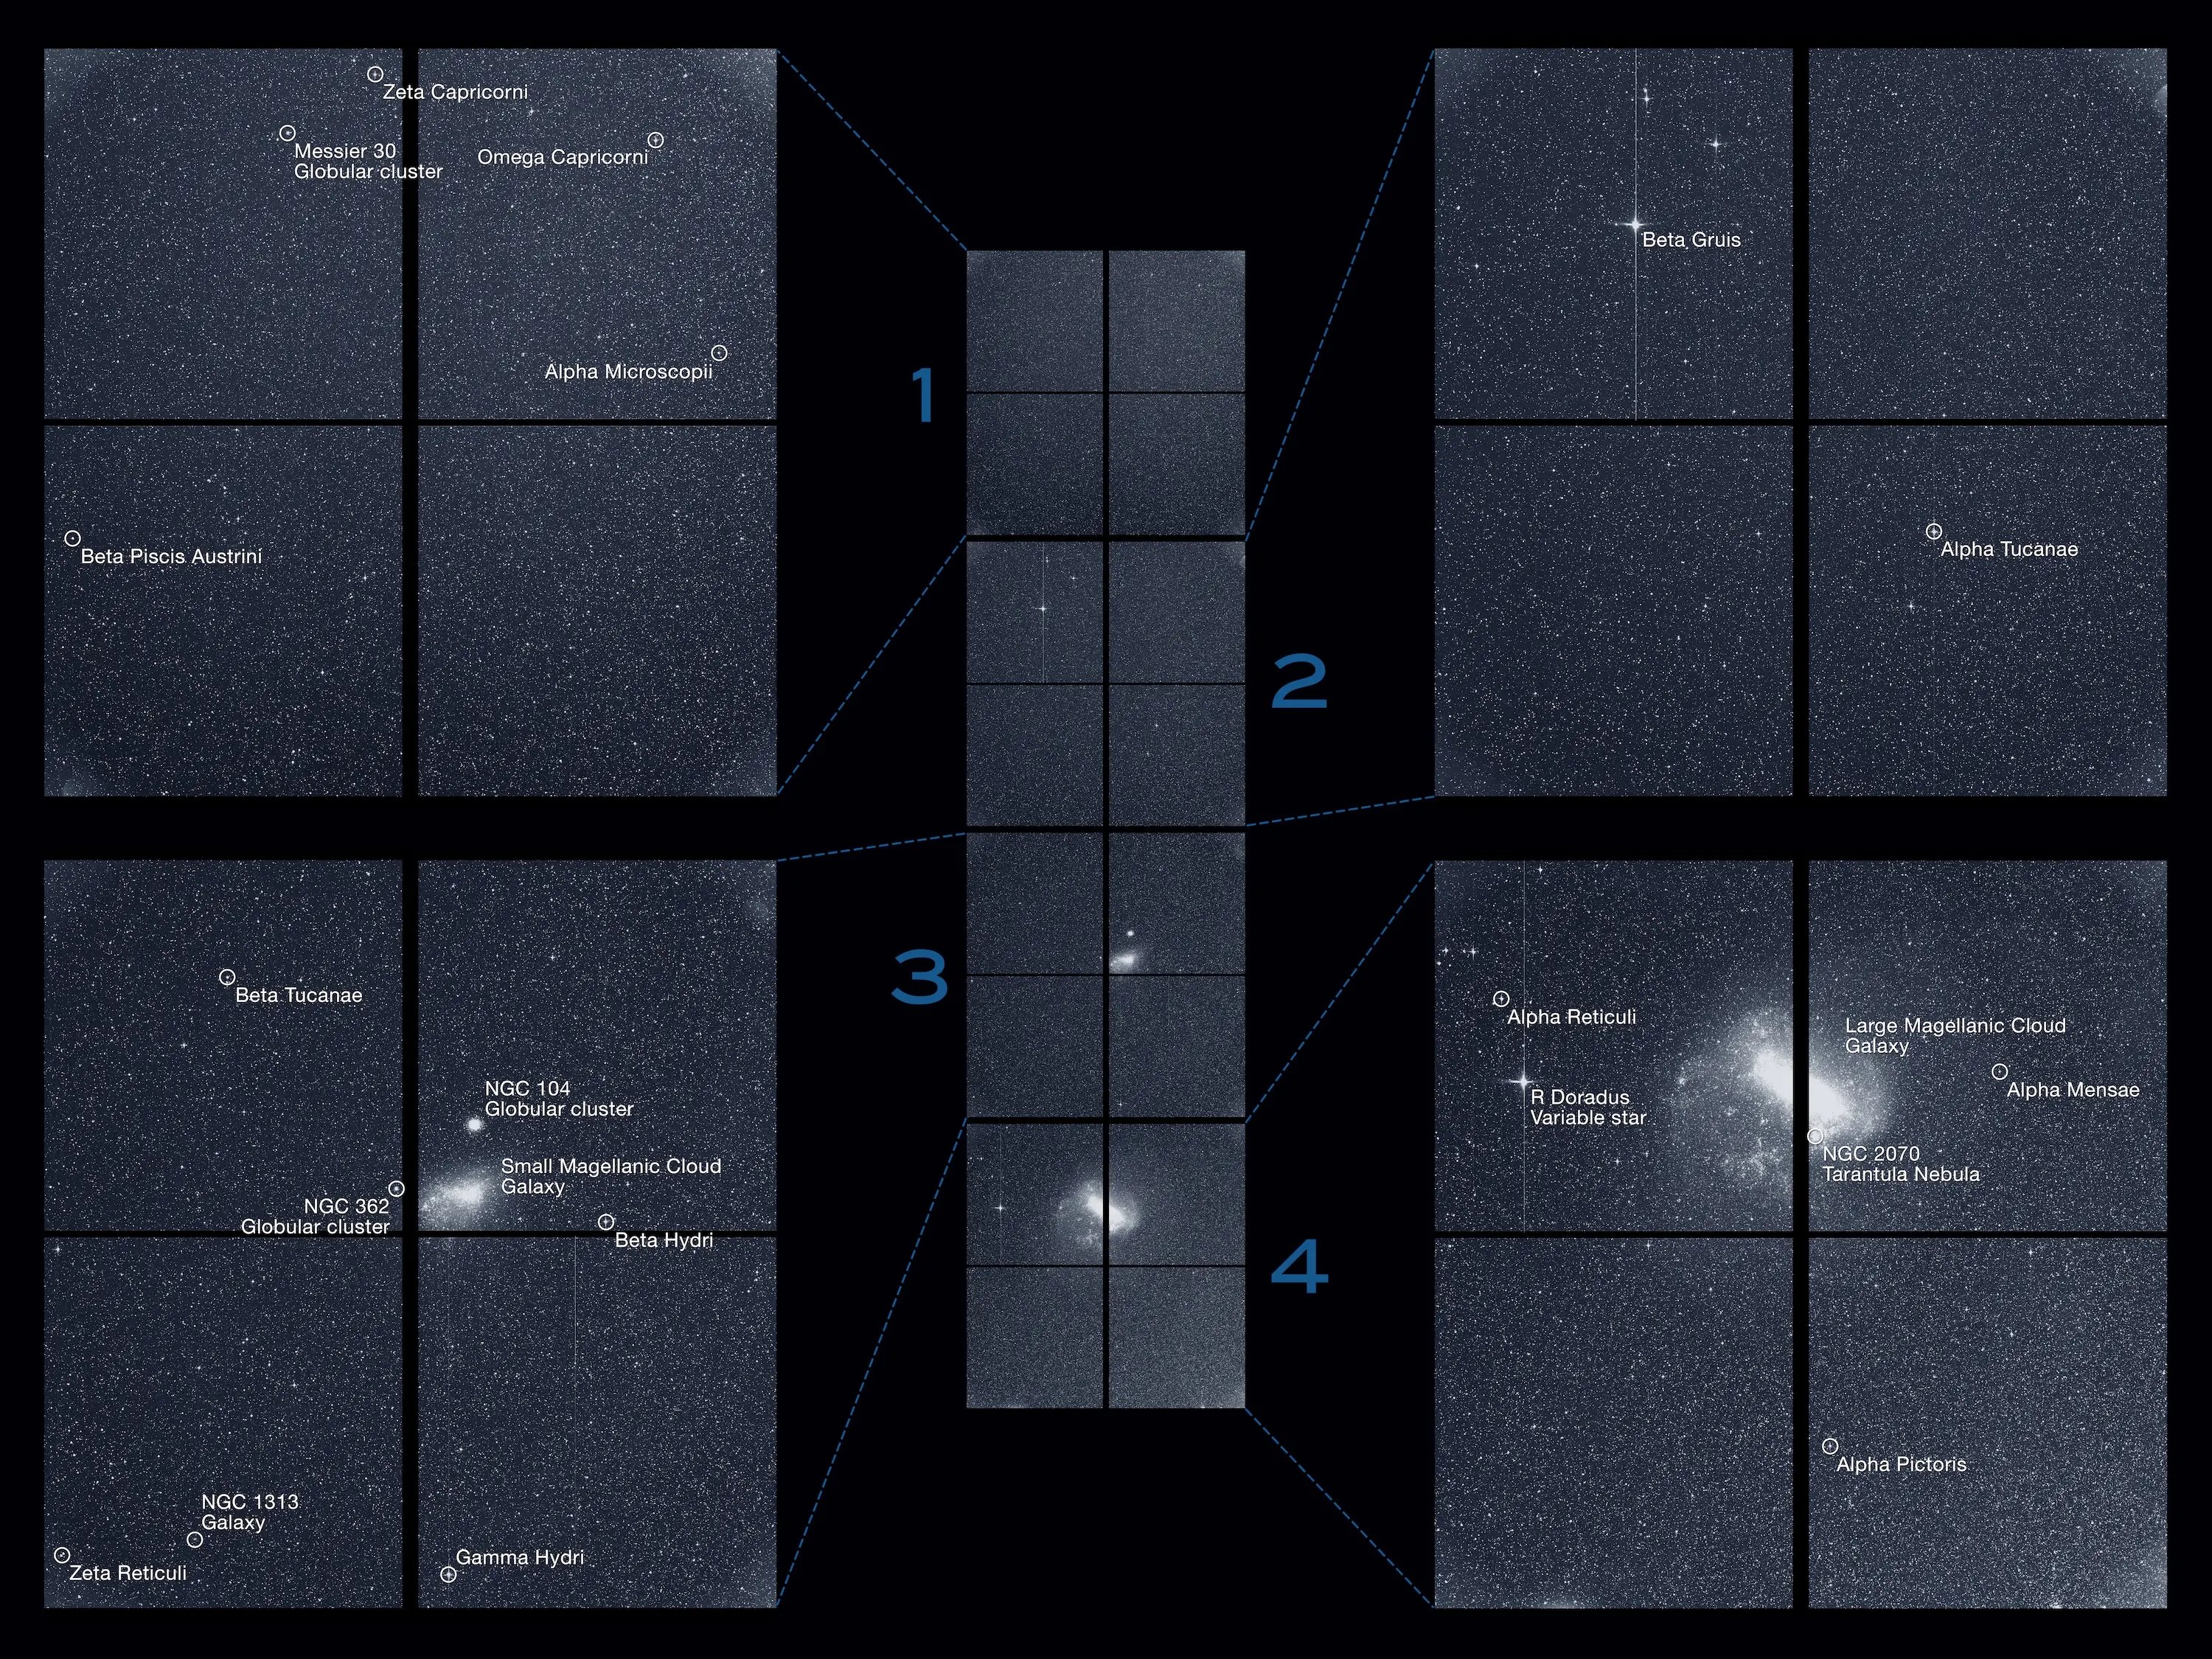 The Transiting Exoplanet Survey Satellite (TESS) captured this strip of stars and galaxies in the southern sky during one 30-minute period on Tuesday, Aug. 7. Created by combining the view from all four of its cameras, this is TESS’ “first light,” from the first observing sector that will be used for identifying planets around other stars. Elements are labeled in the collage.